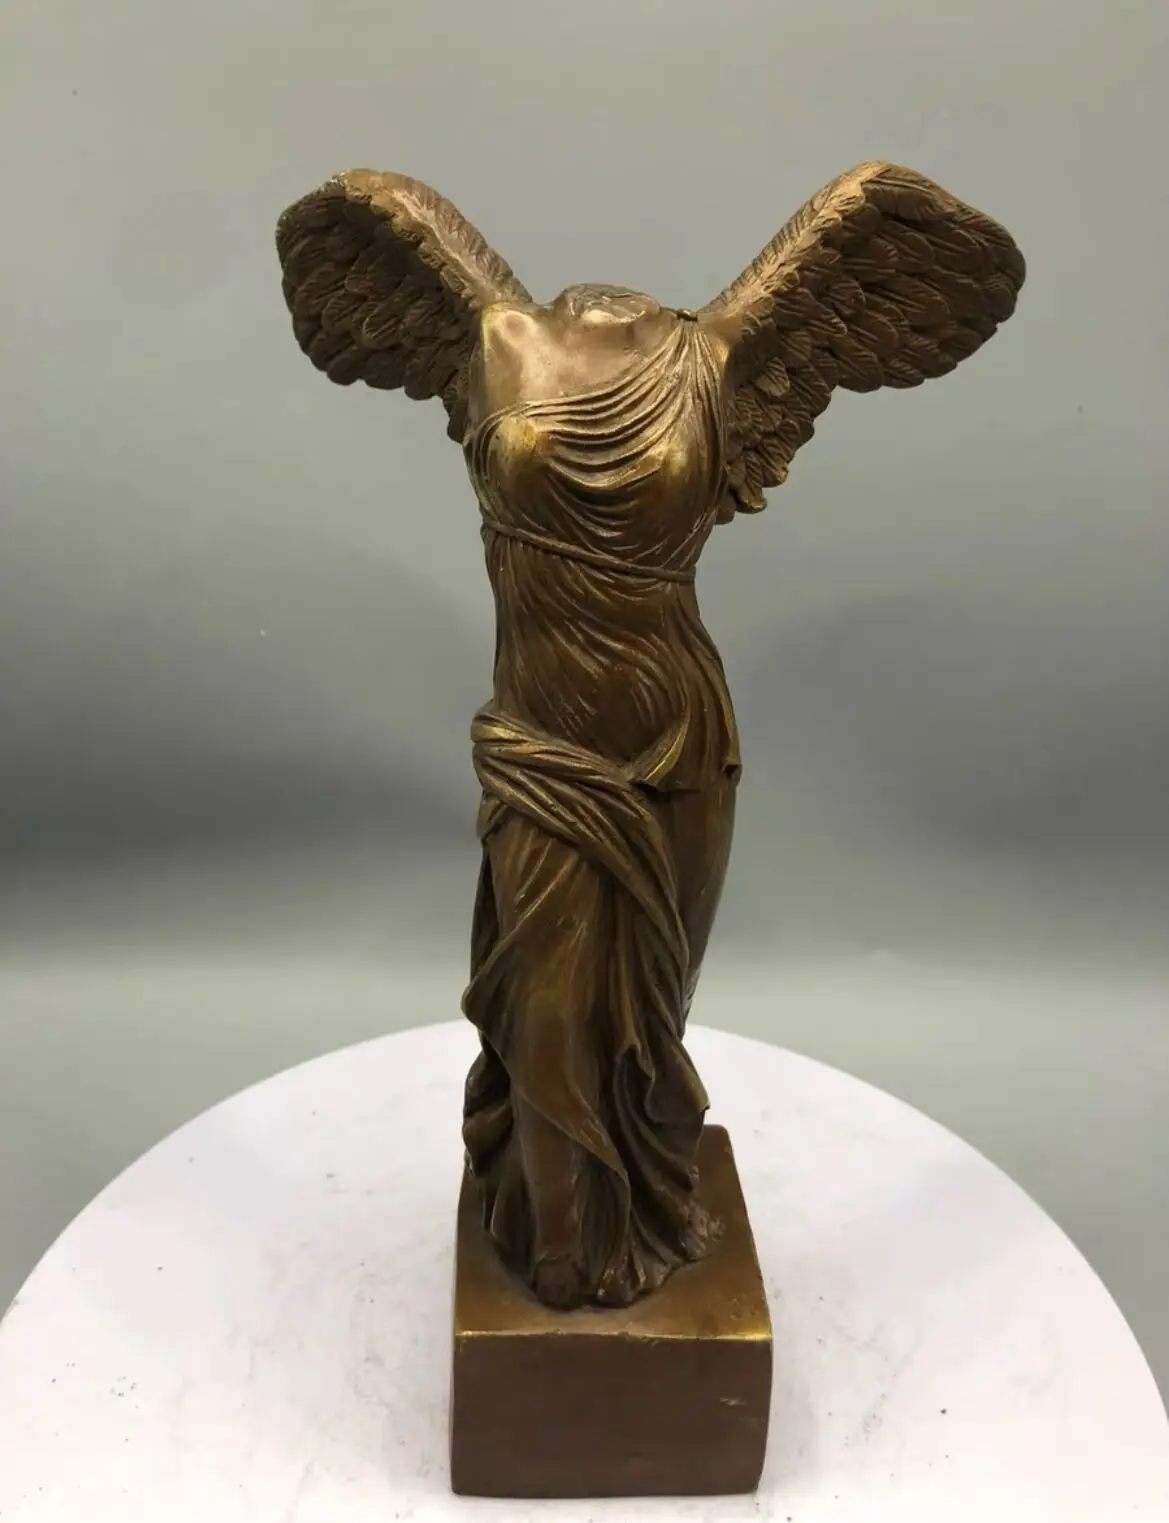 

Art Collection Bronze statue, Handmade Bust Sculptures,World-famous Figures, "Goddess of Victory", Home decoration Metal Crafts